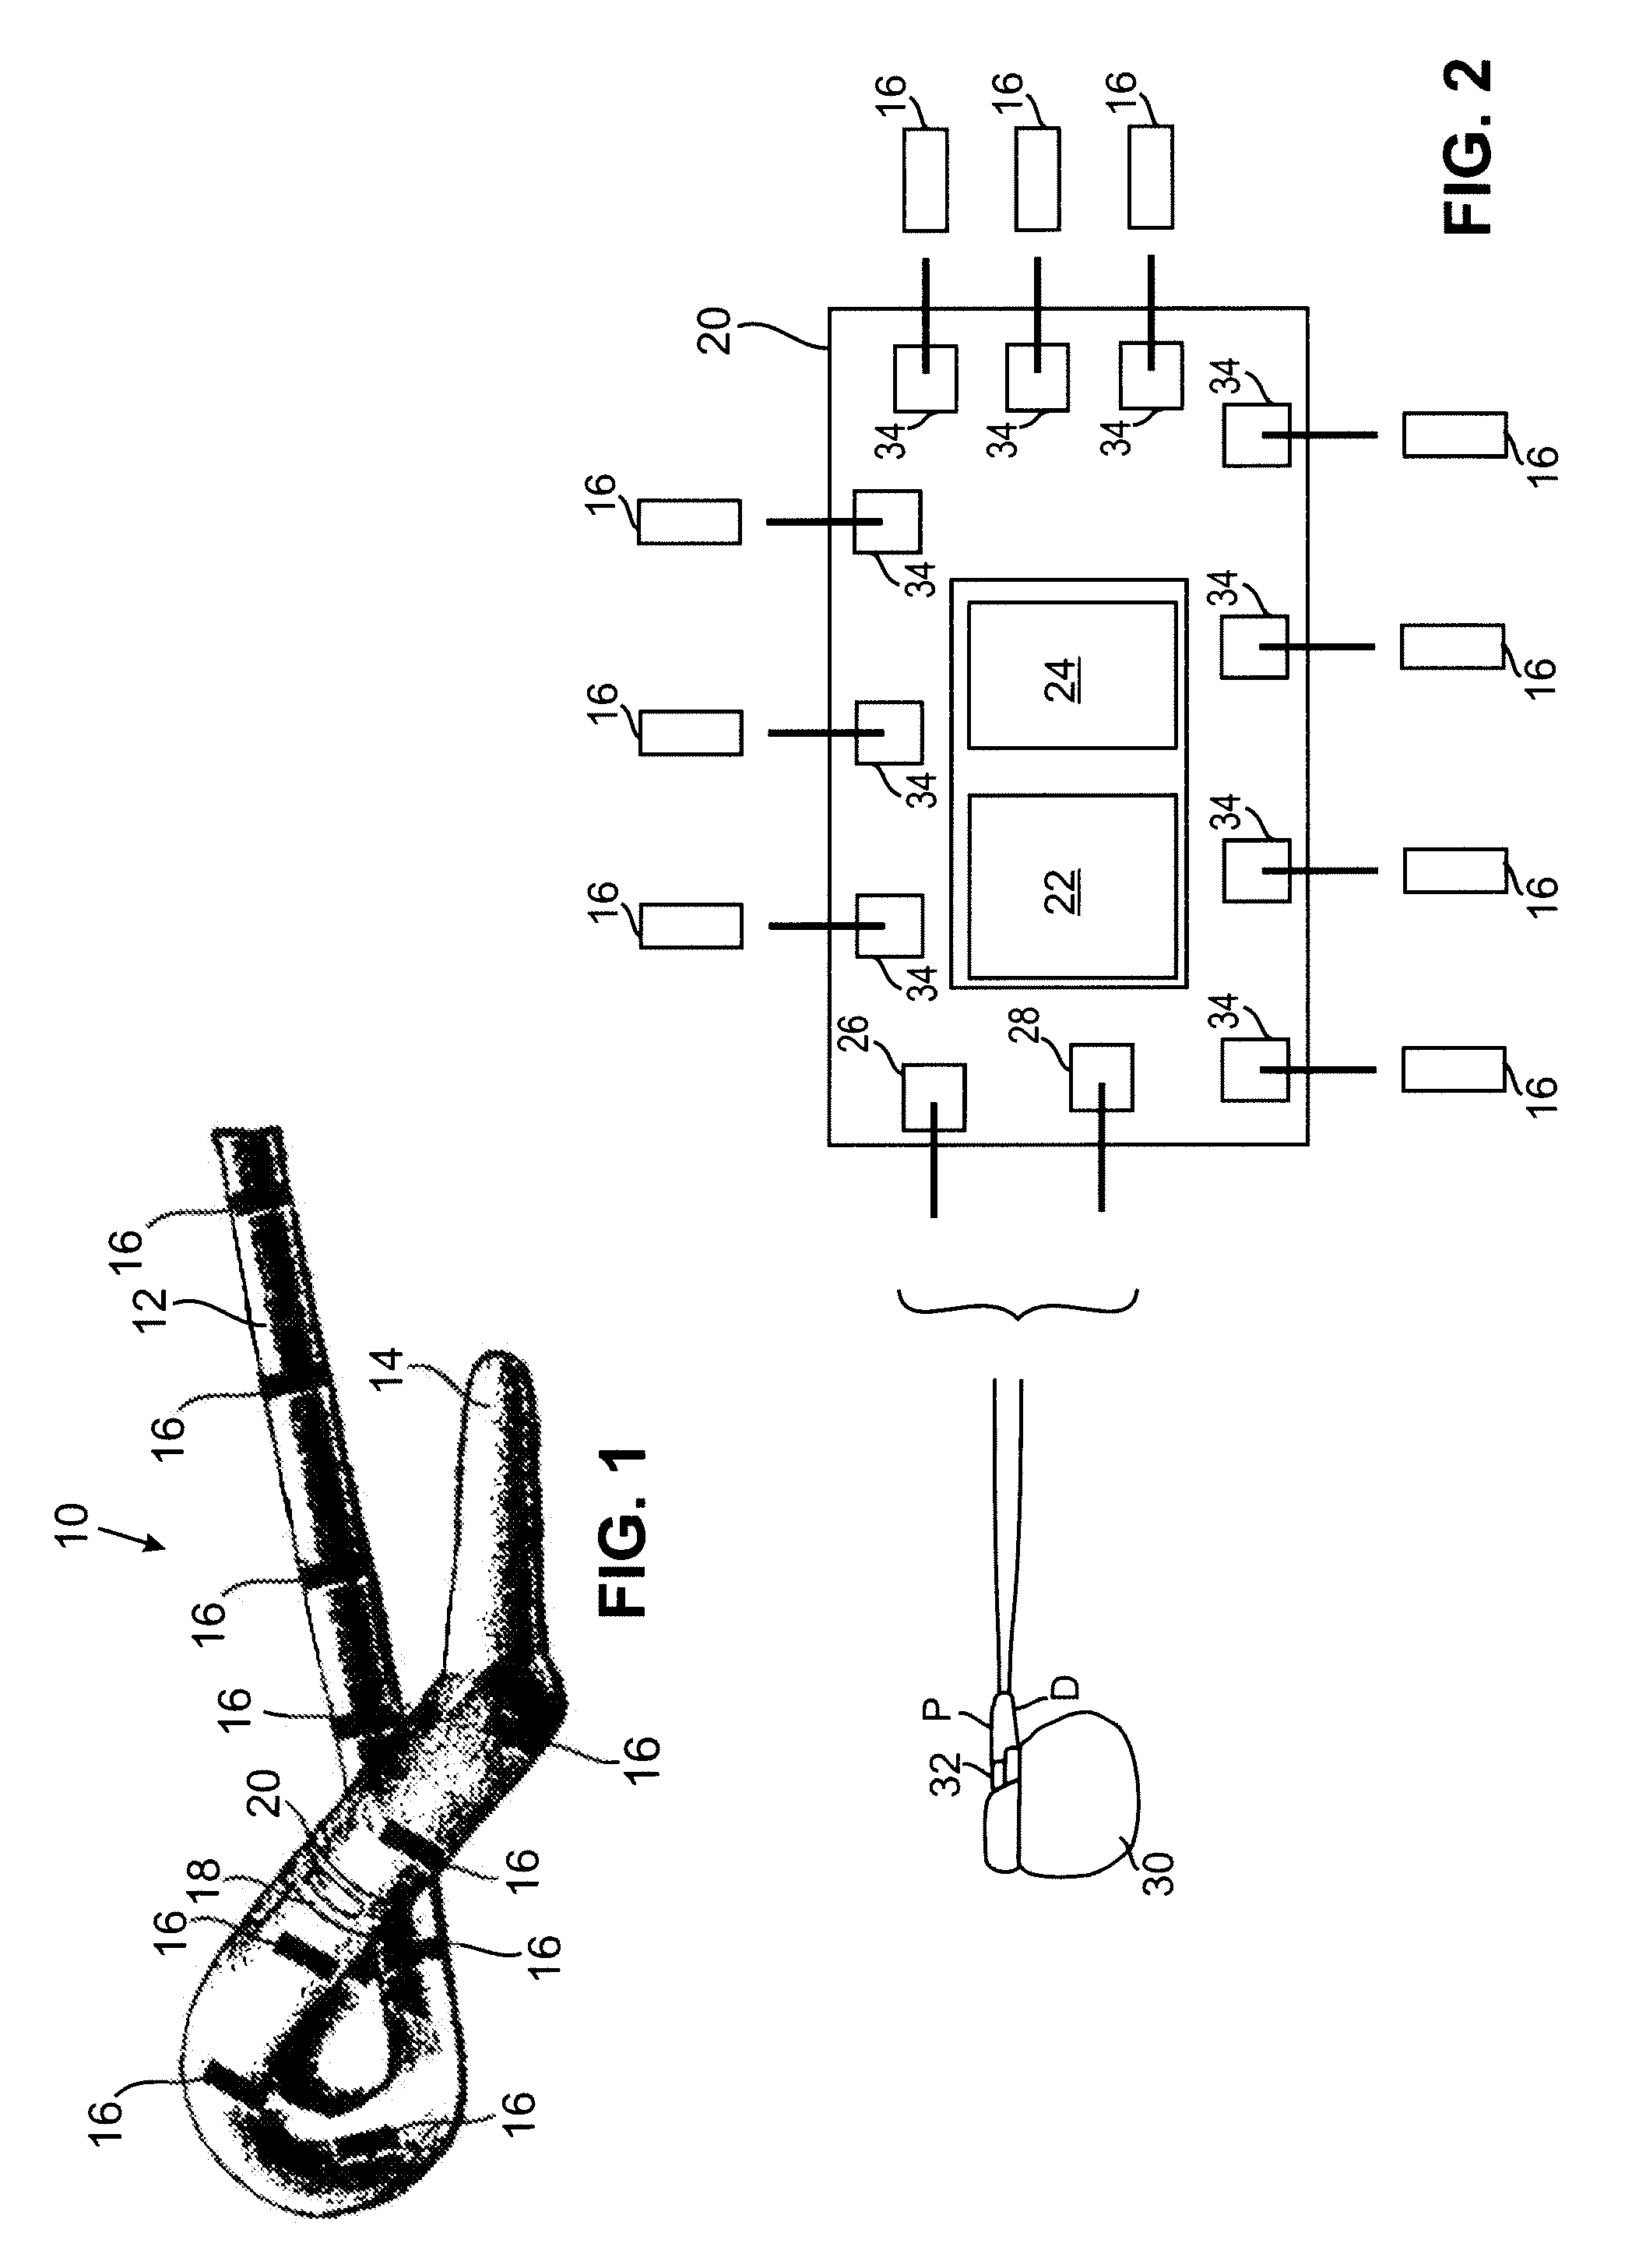 Circuit for controlled commutation of multiplexed electrodes for an active implantable medical device